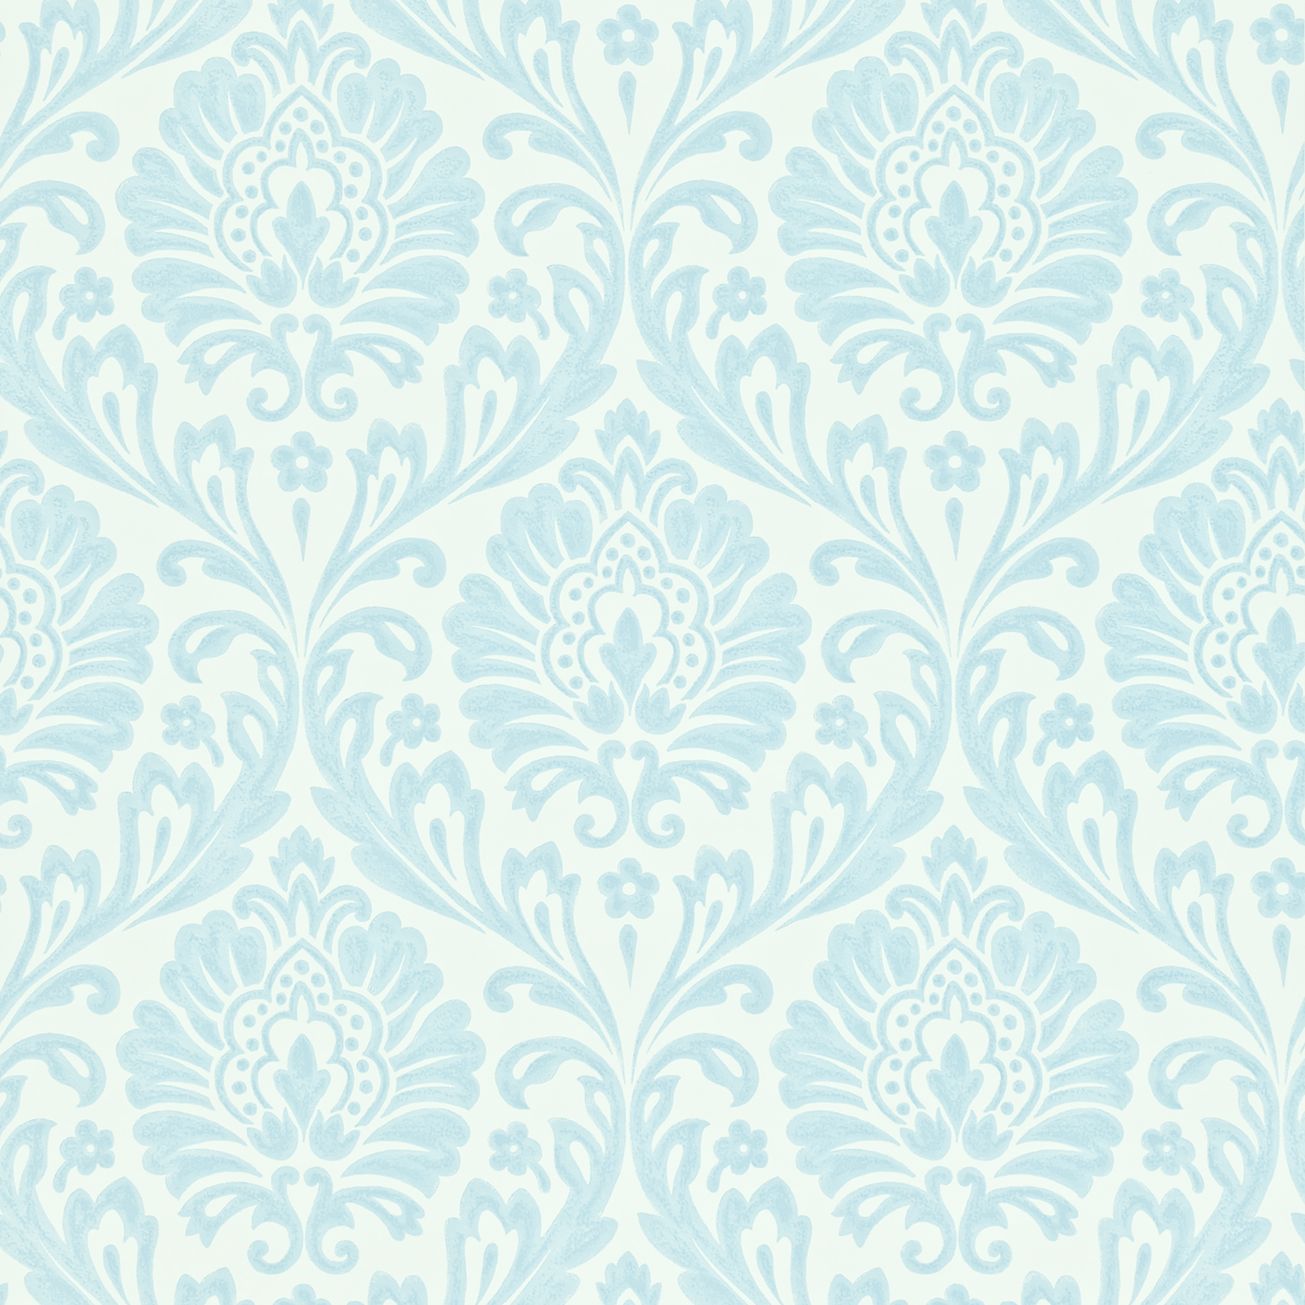  Damask Wallpaper Maycott Wallpapers Collection Sanderson Wallpaper 1305x1305